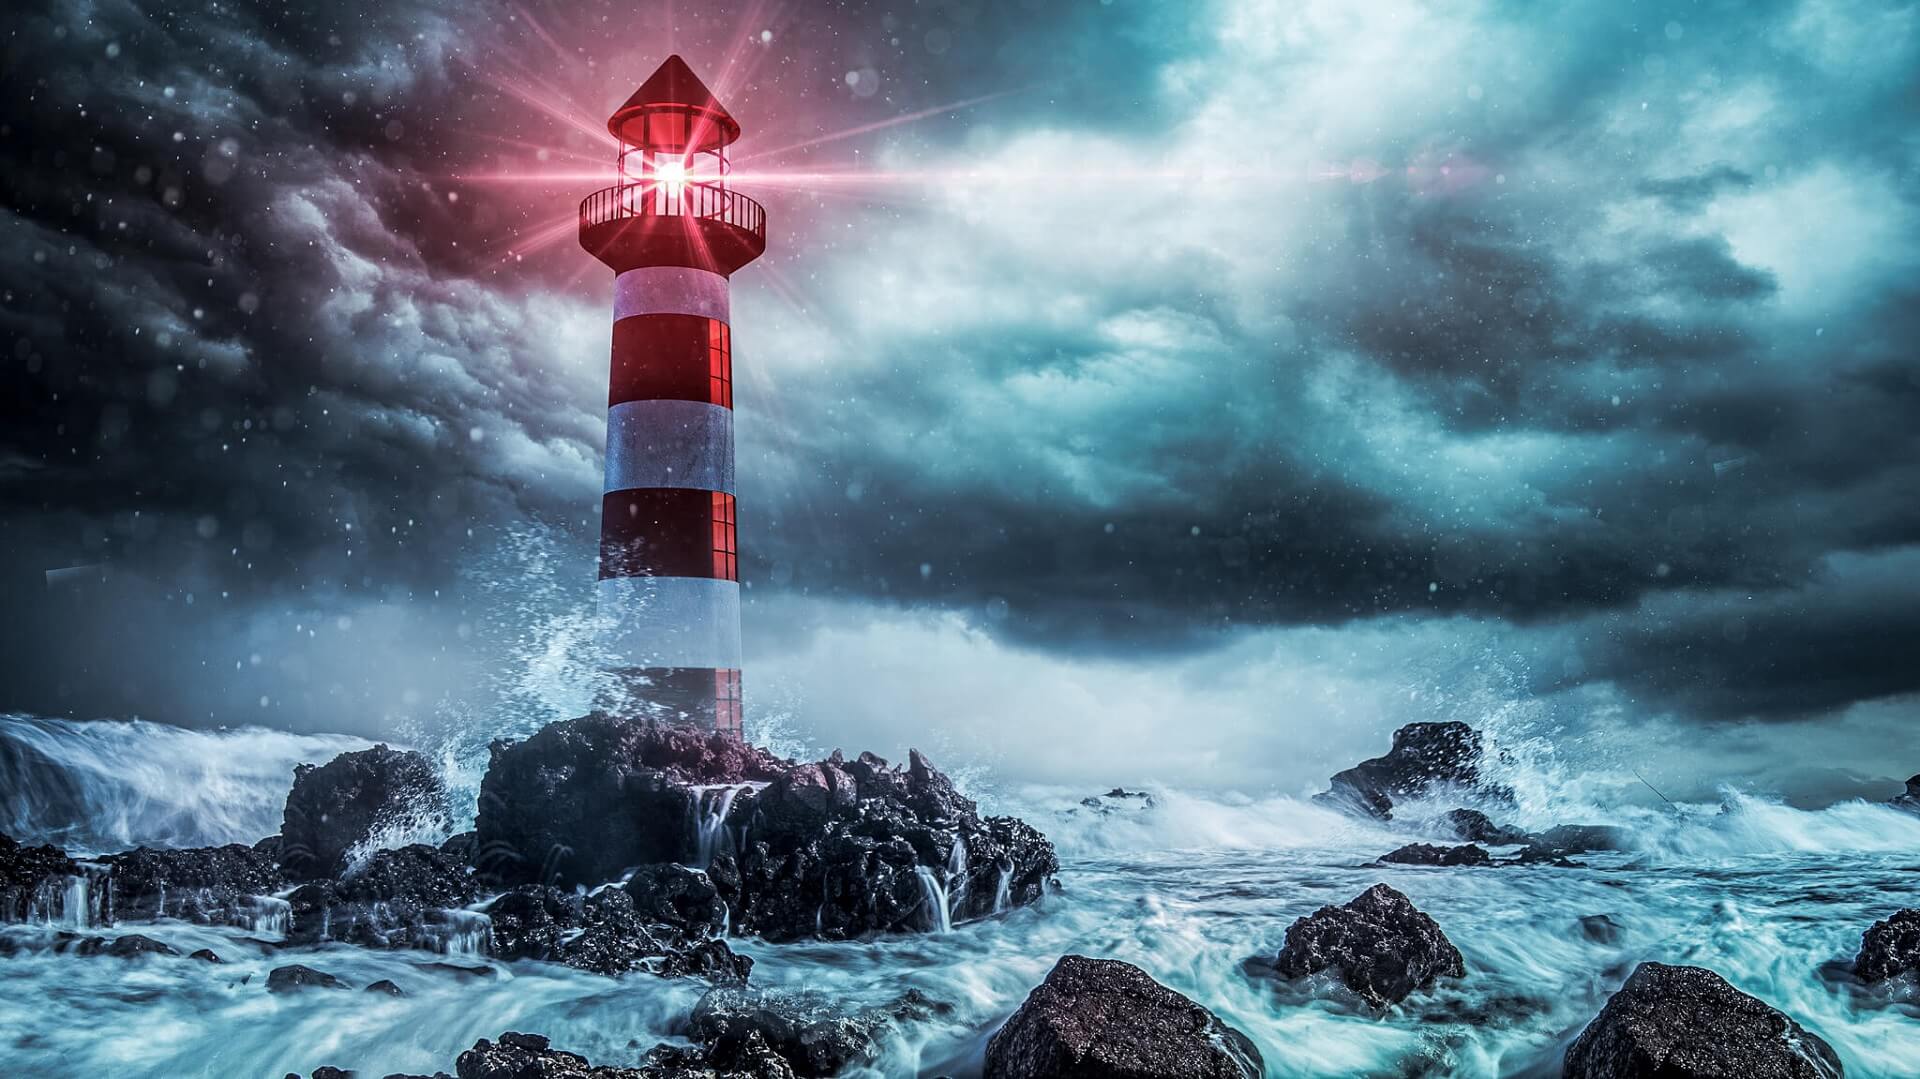 Lighthouse in stormy water - TrendTalk 10